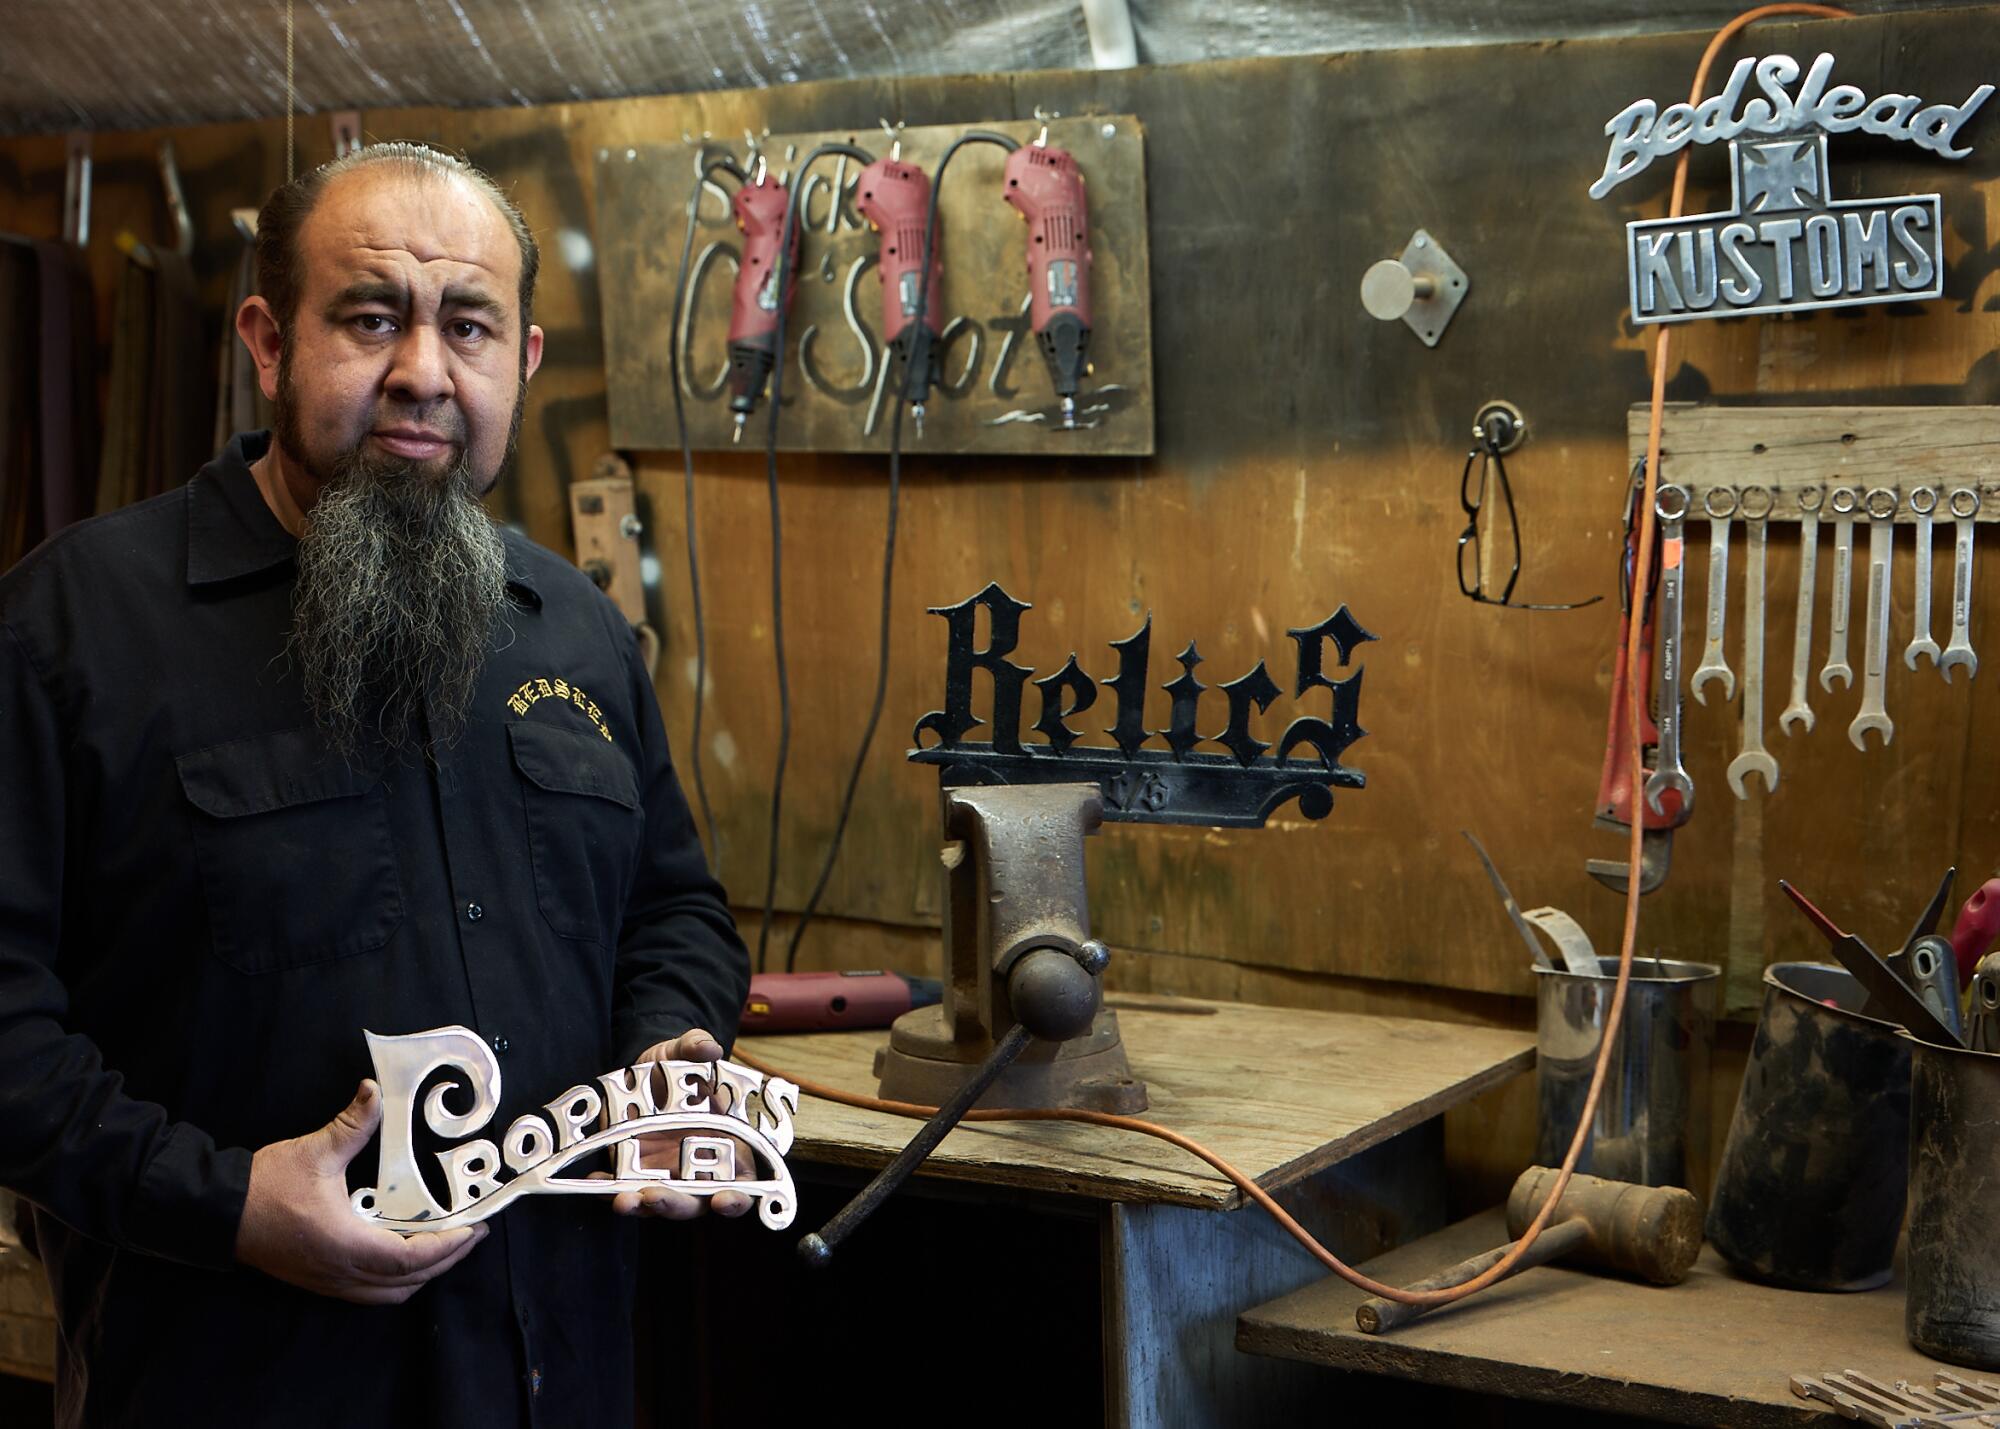 The finishing of the lowrider plaque designed by Pinche Kid. David Lopez will be finishing up the design.